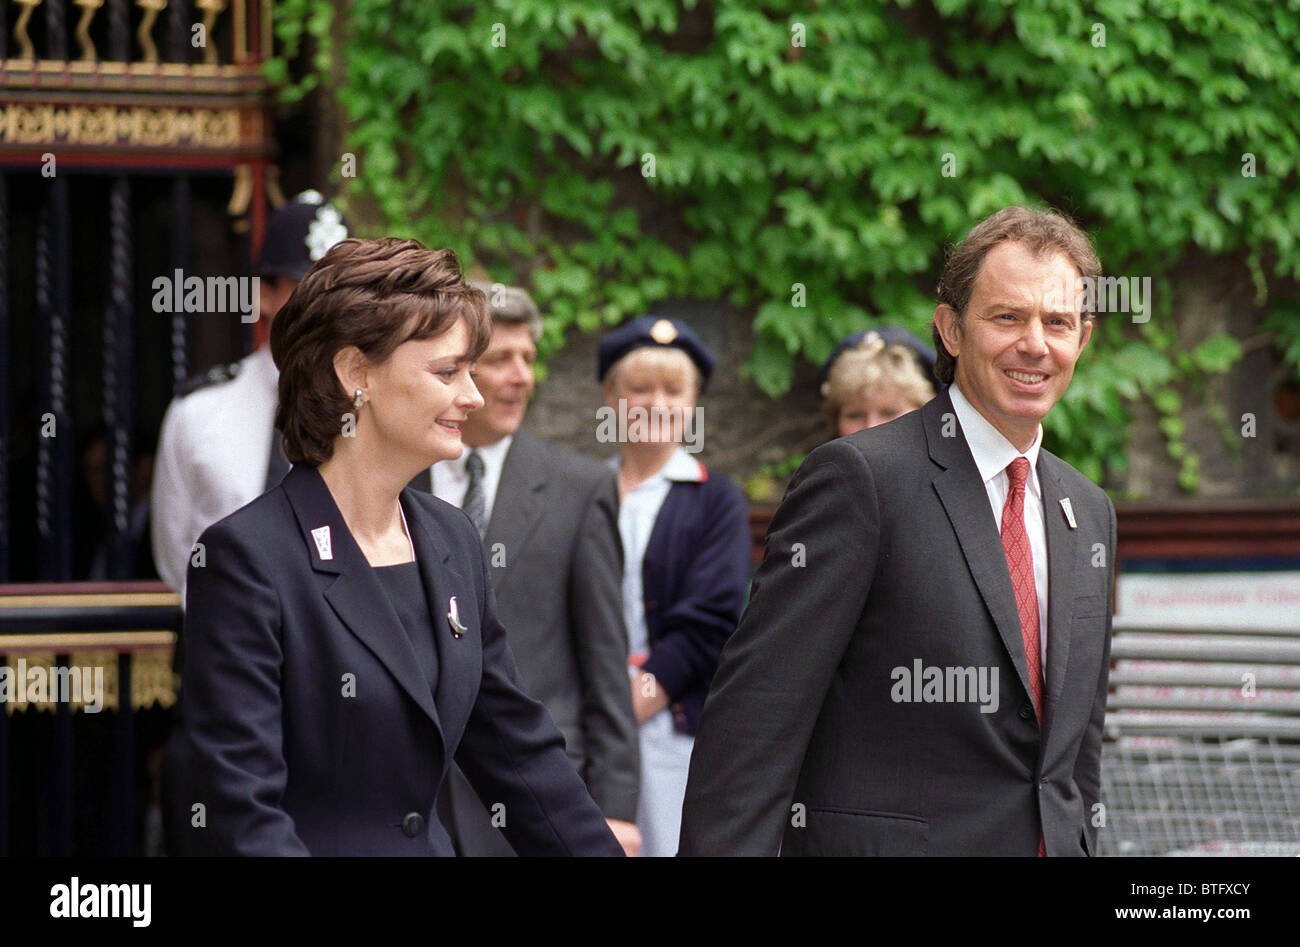 PRIME MINISTER TONY BLAIR AND WIFE, CHERIE BLAIR, ATTEND NHS SERVICE AT Westminster Abbey Stock Photo